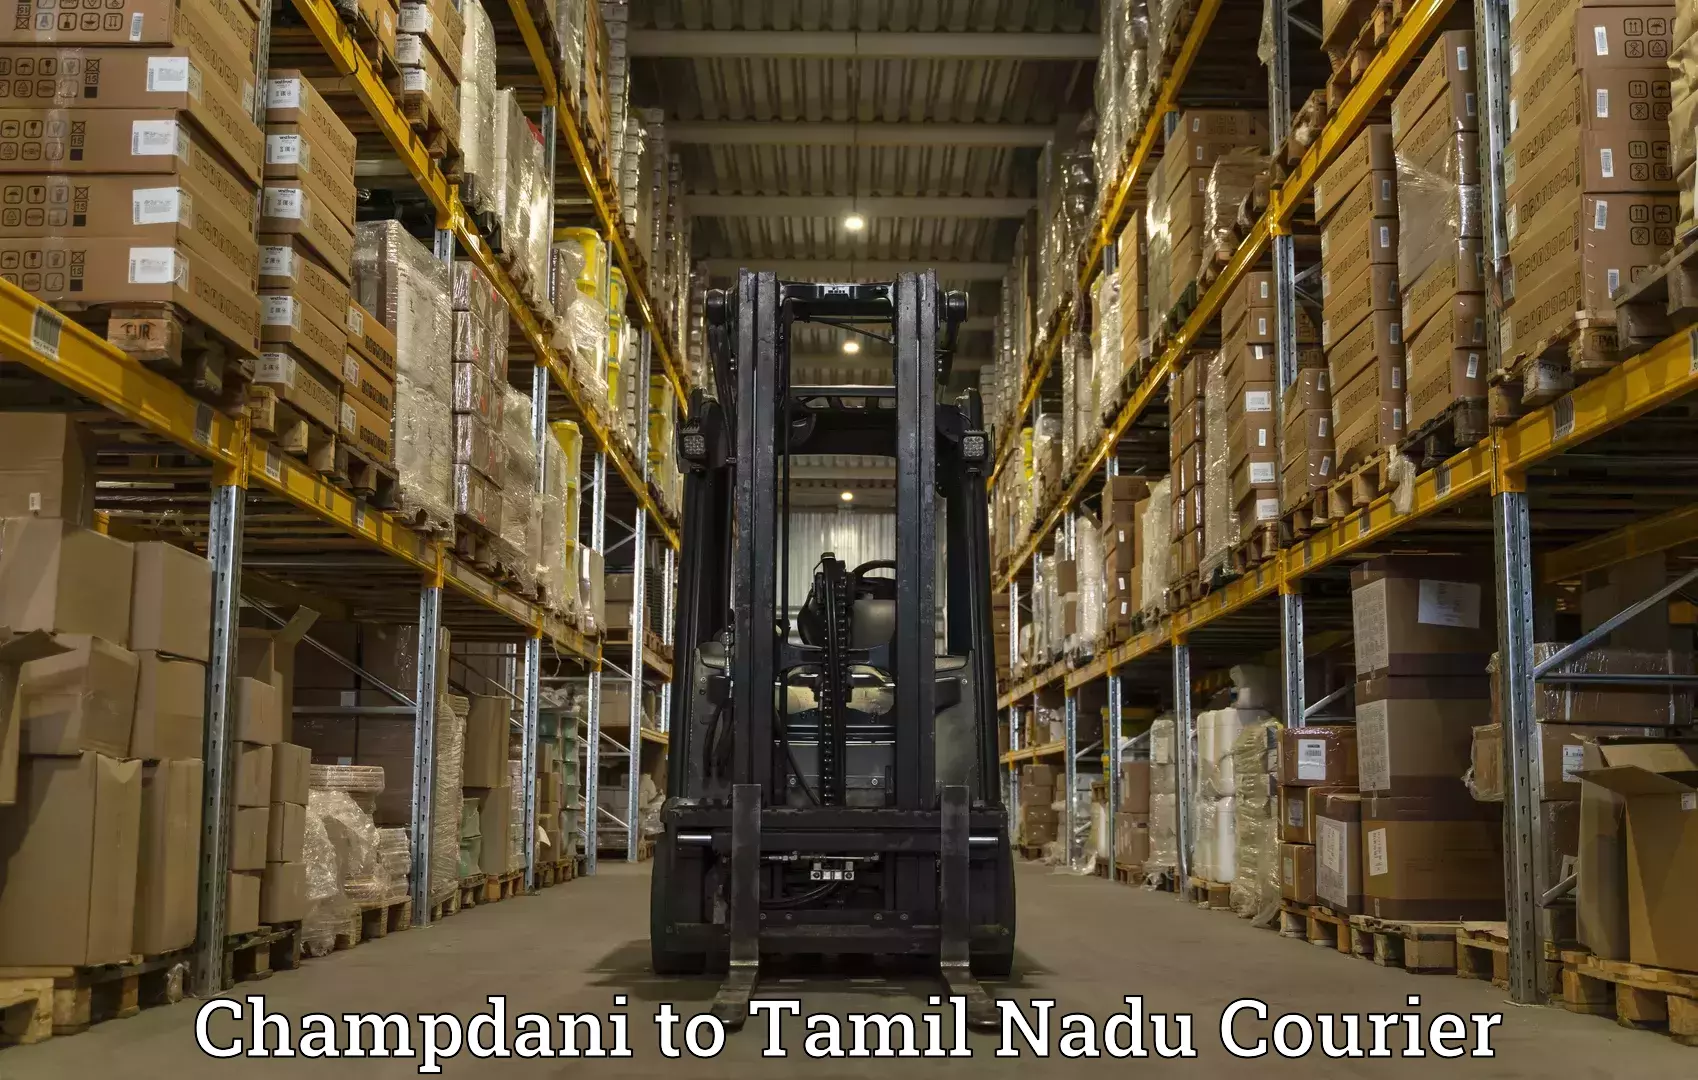 Full-service courier options Champdani to Sivaganga